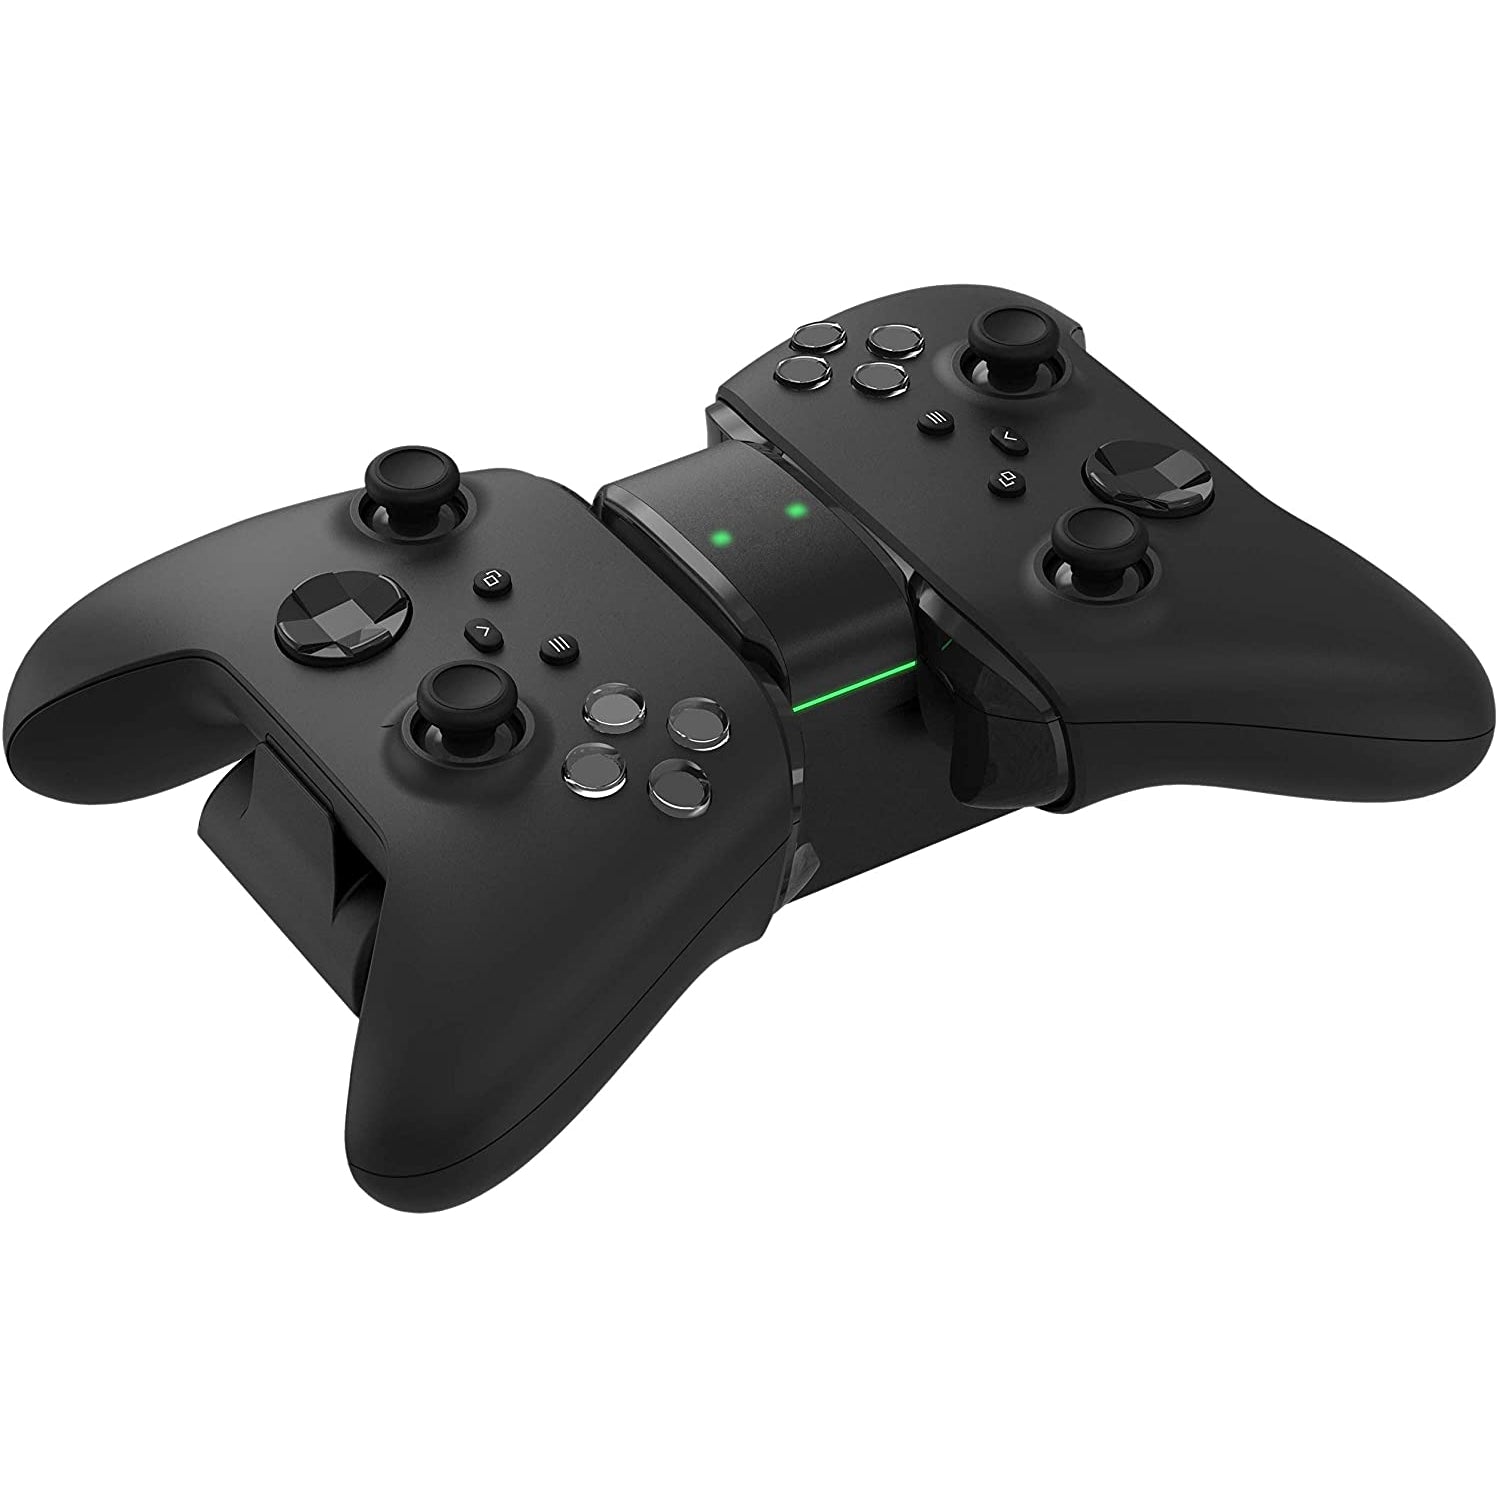 Revent Xbox Series X Twin Charging Dock with Controller Charger and 2 x Battery Packs - Refurbished Pristine